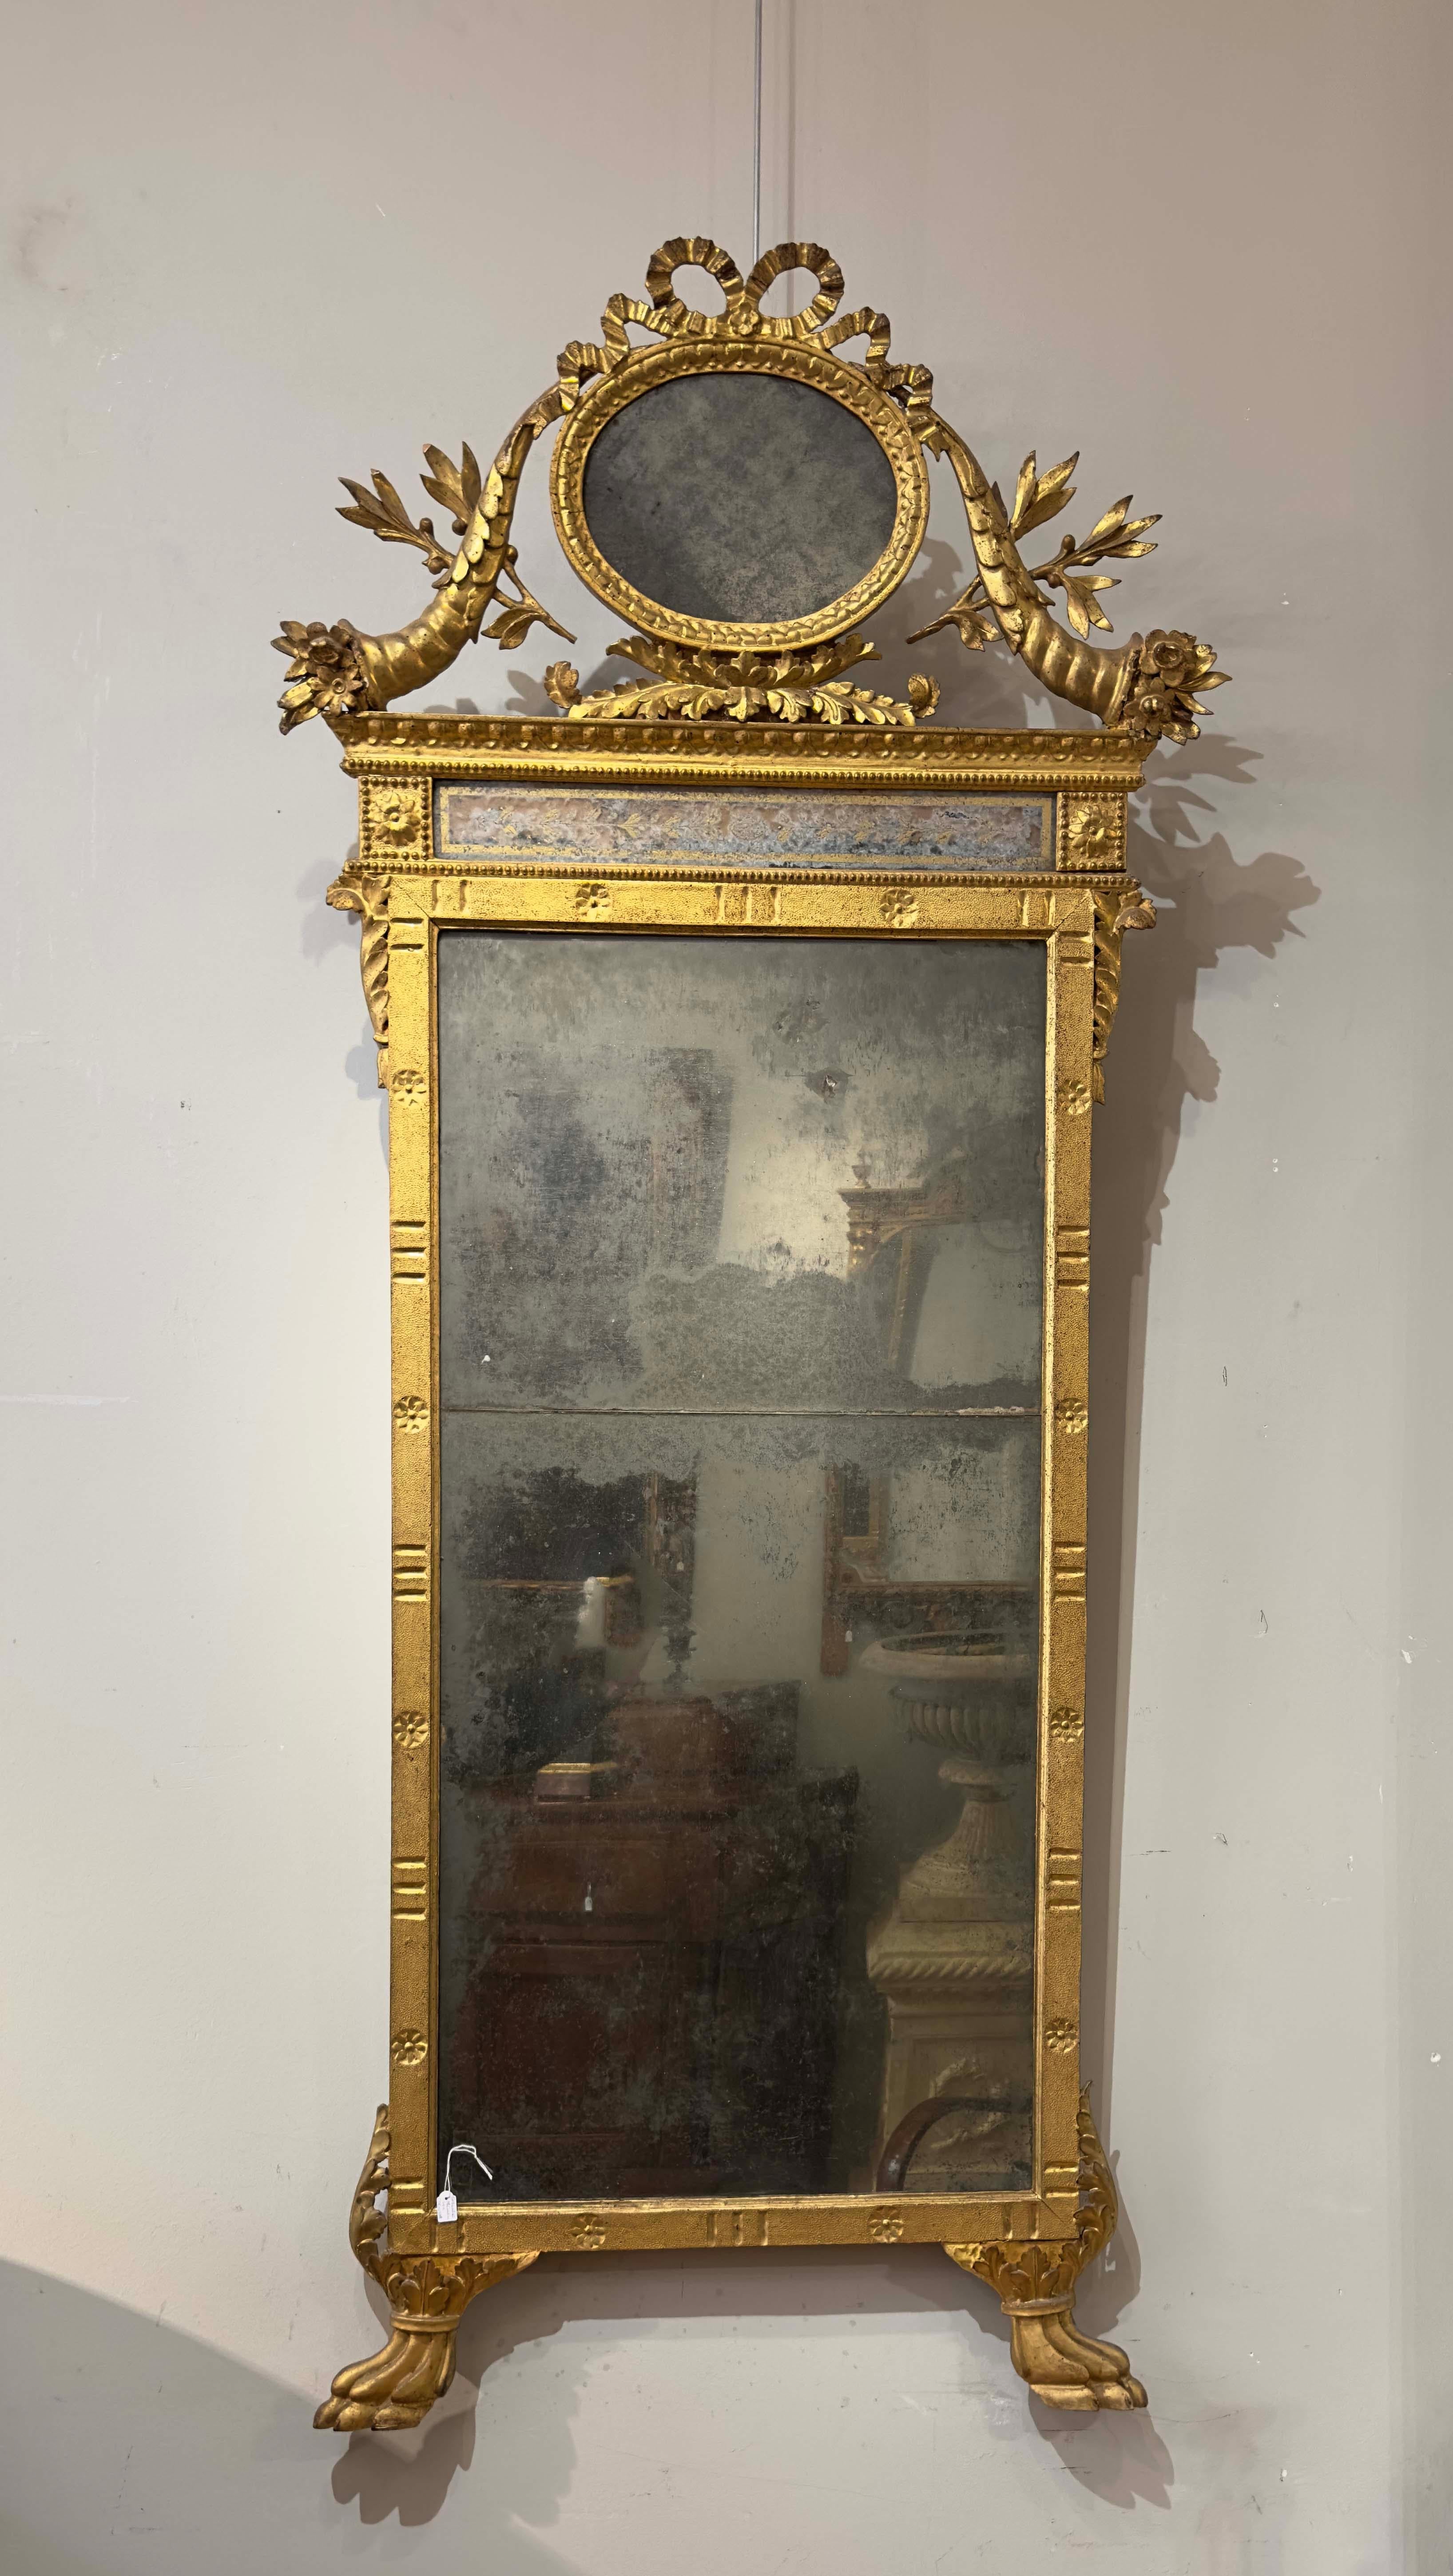 END OF THE 18th CENTURY NEOCLASSICAL MIRROR WITH CORNUCOPIAS AND OLIVE BRANCHES  5